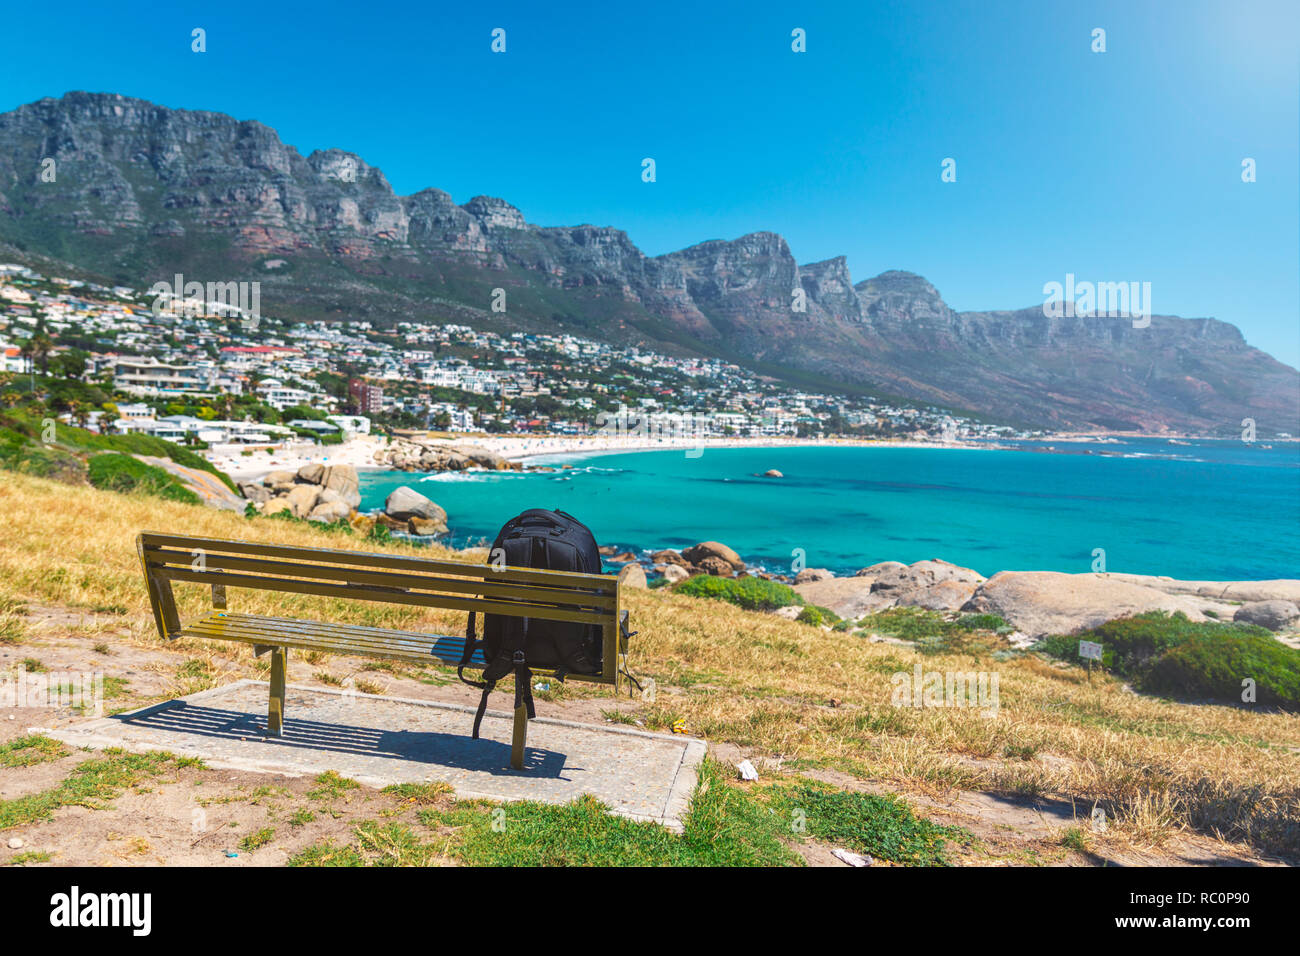 Backpack of lonely traveller on a bench with a view of Camps bay beautiful beach in Cape Town, South Africa Stock Photo